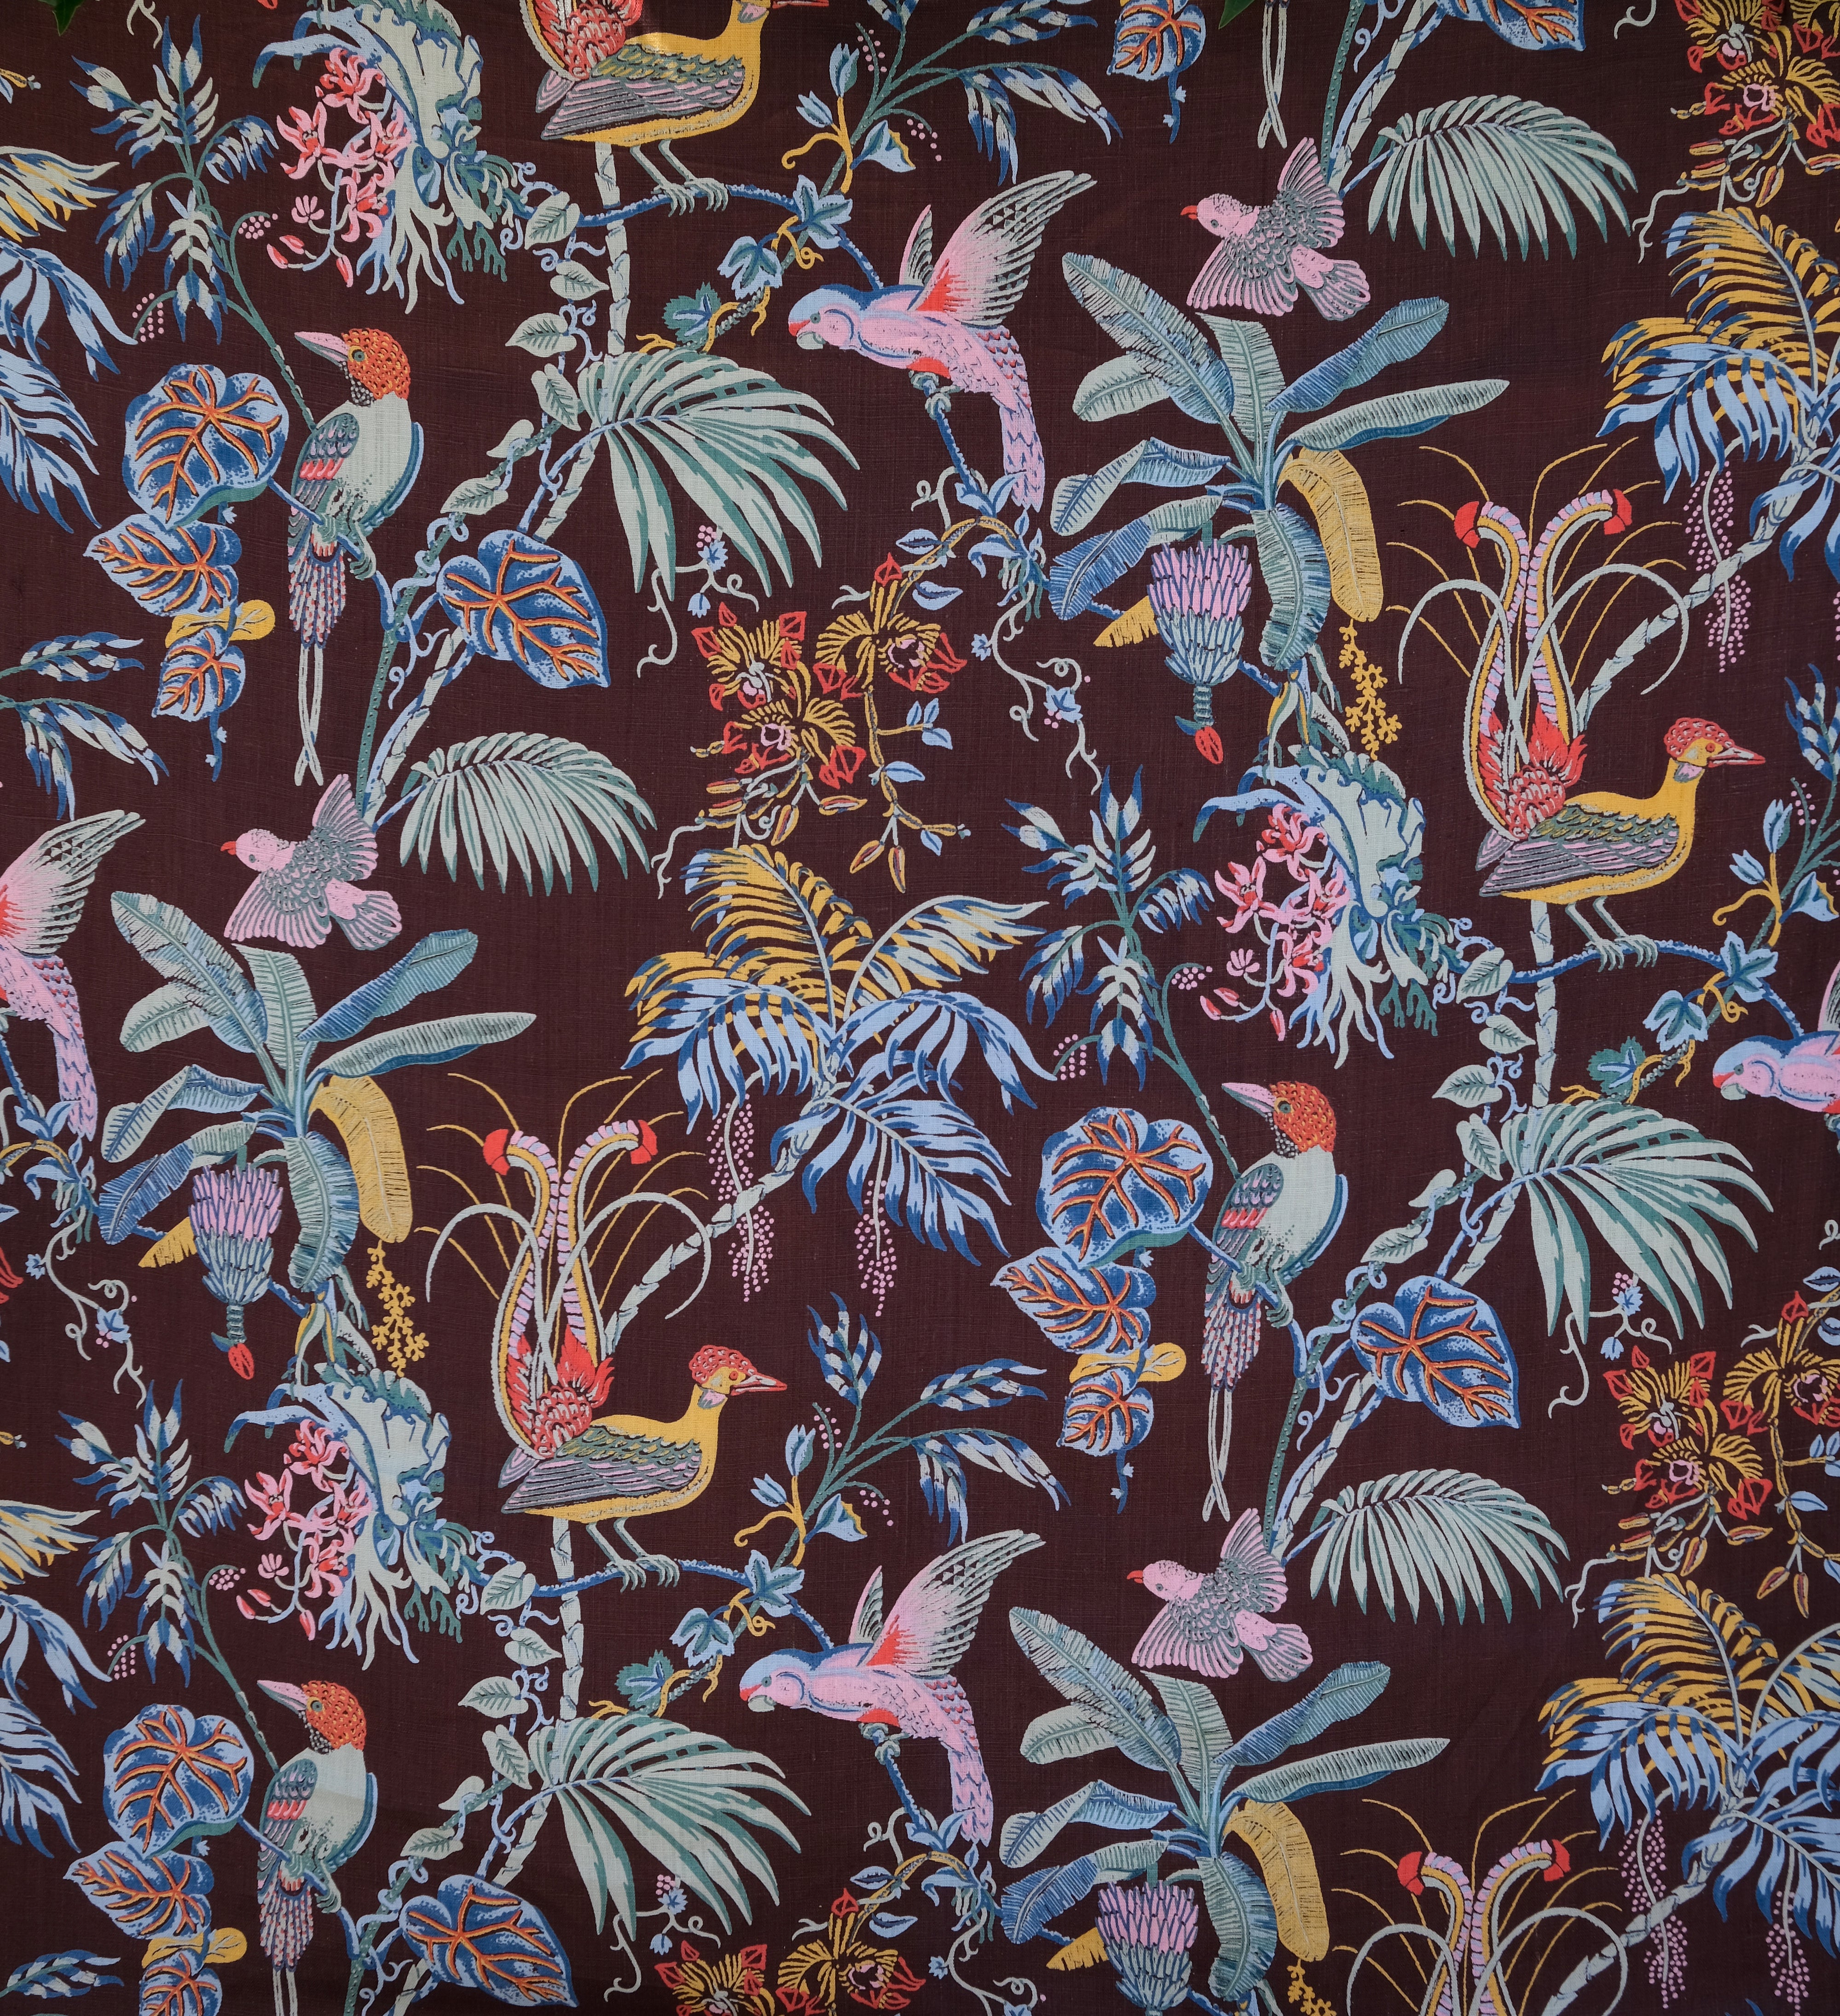 Detail of fabric in a dense leaf and bird print in a rainbow of shades on a dark brown field.